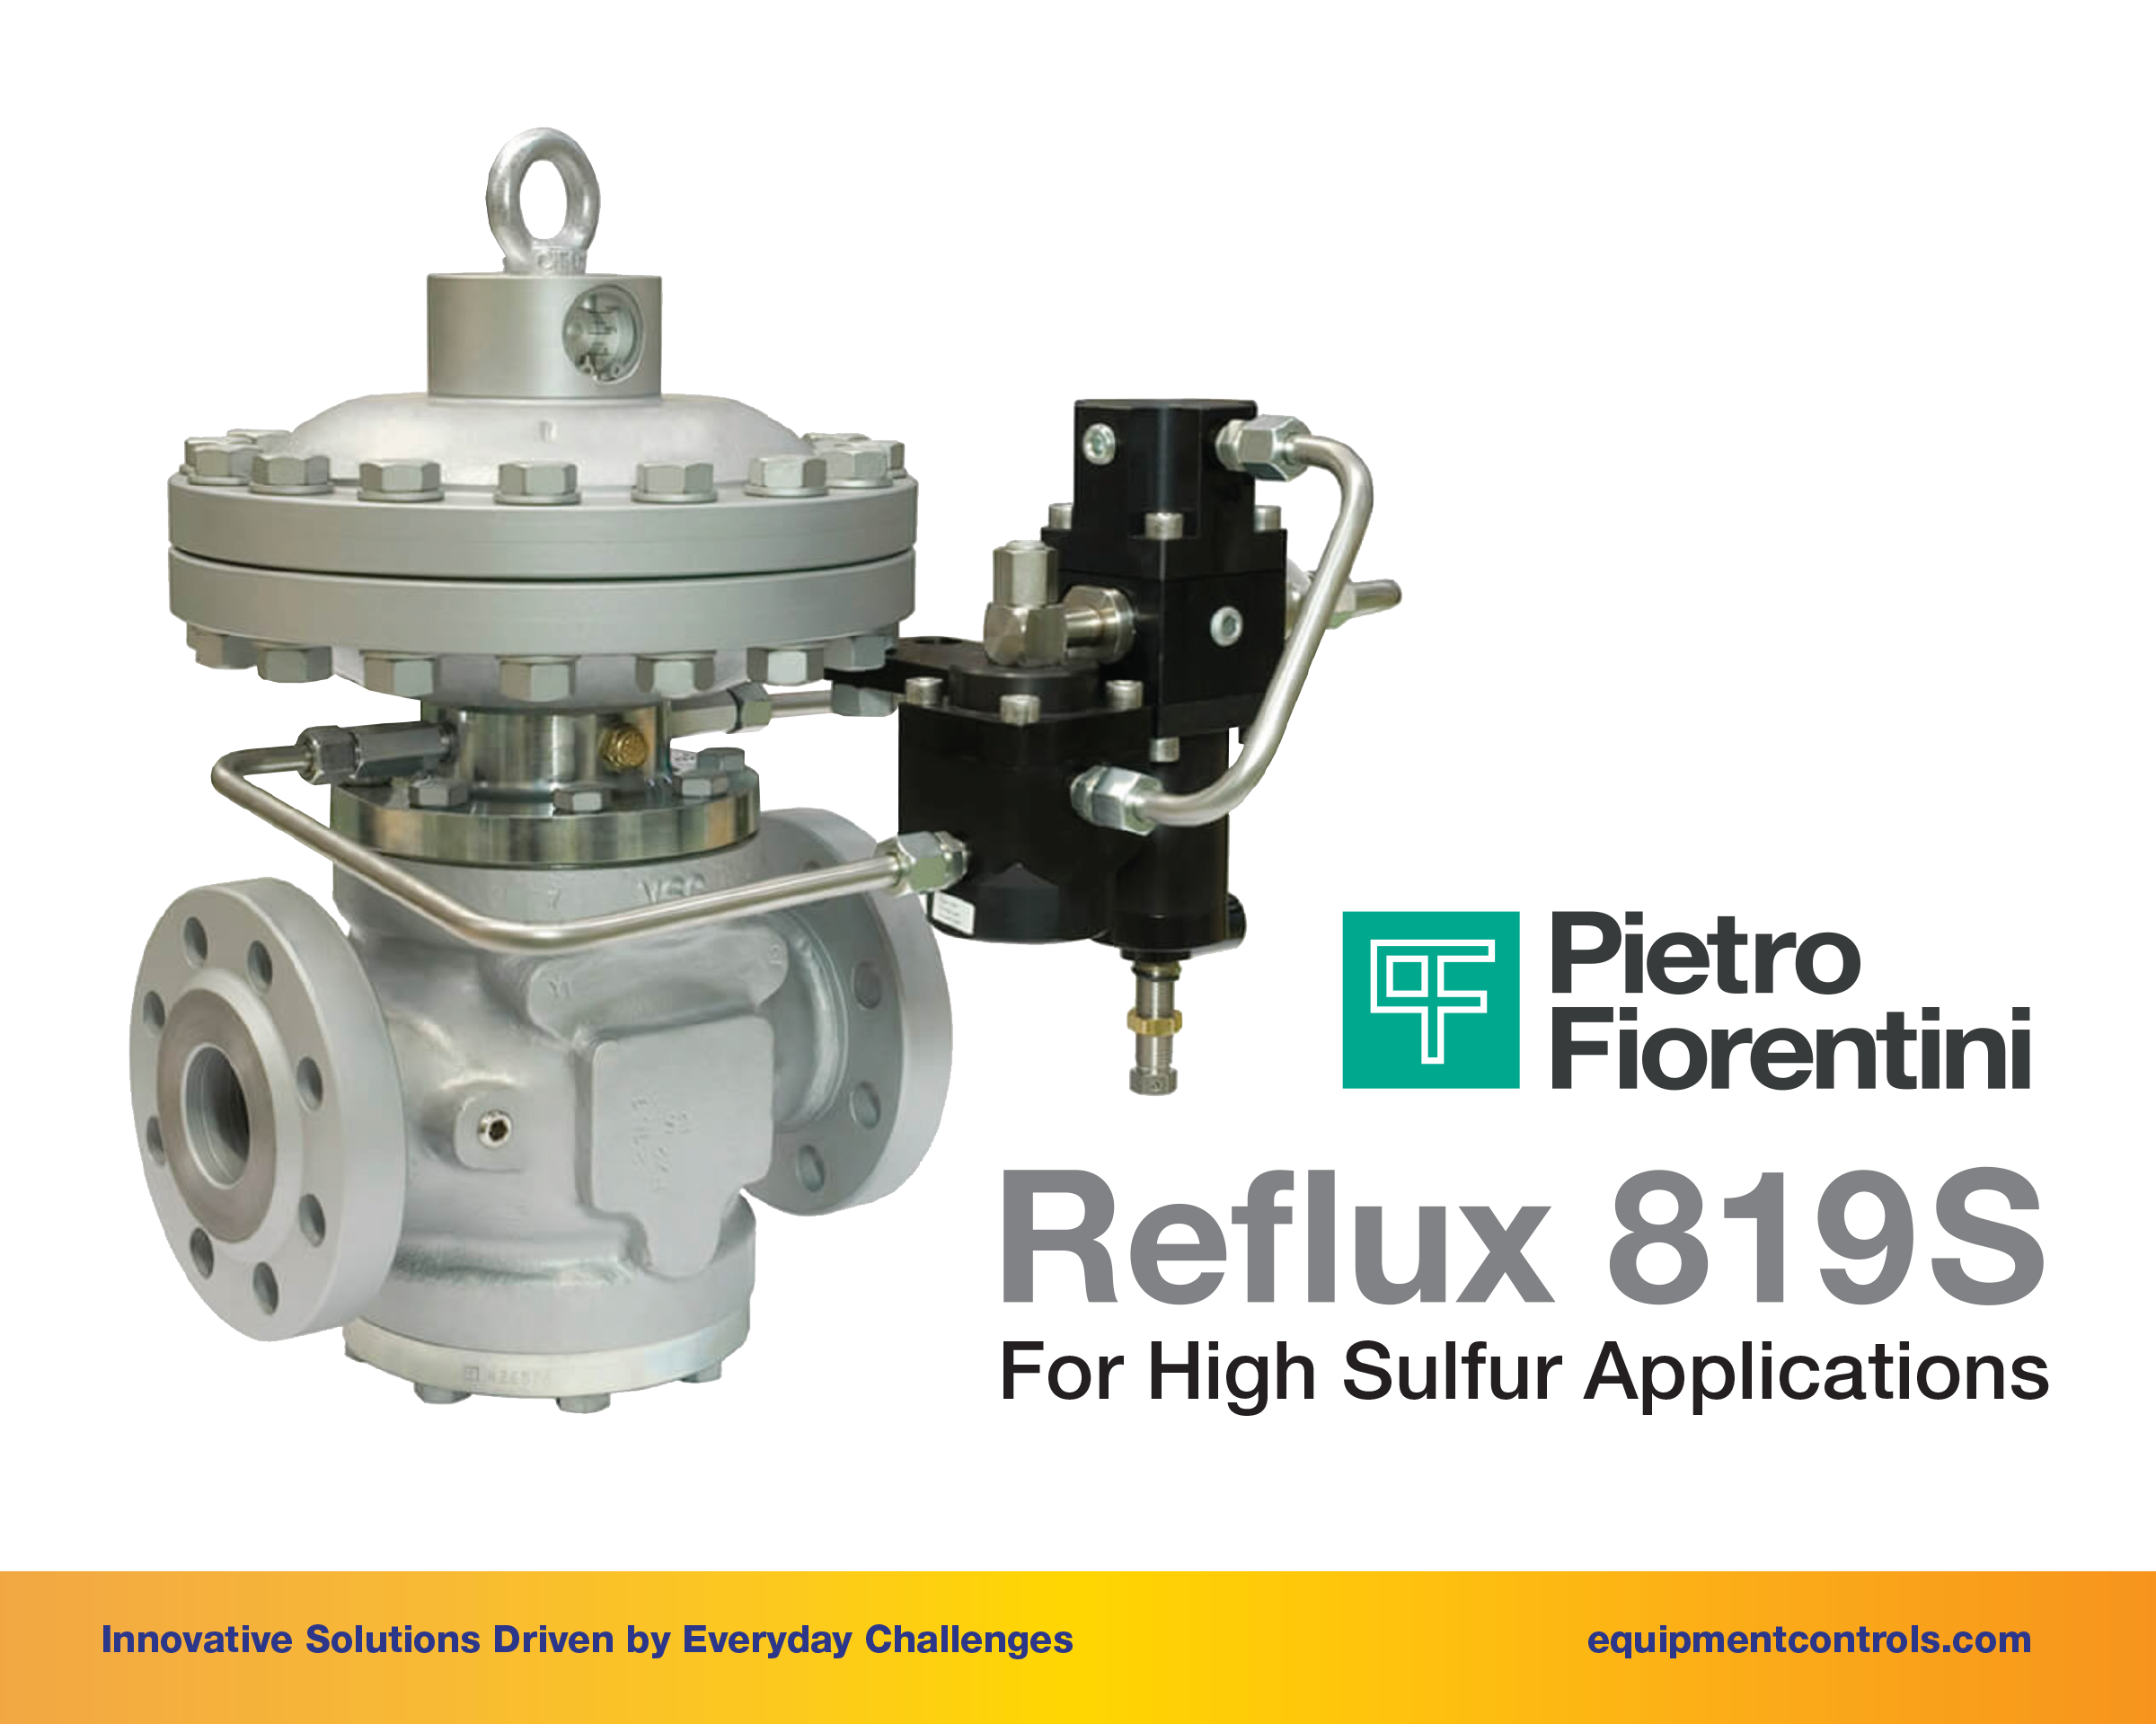 Pietro Fiorentini’s Reflux 819S is Designed Specifically for High Sulfur Applications